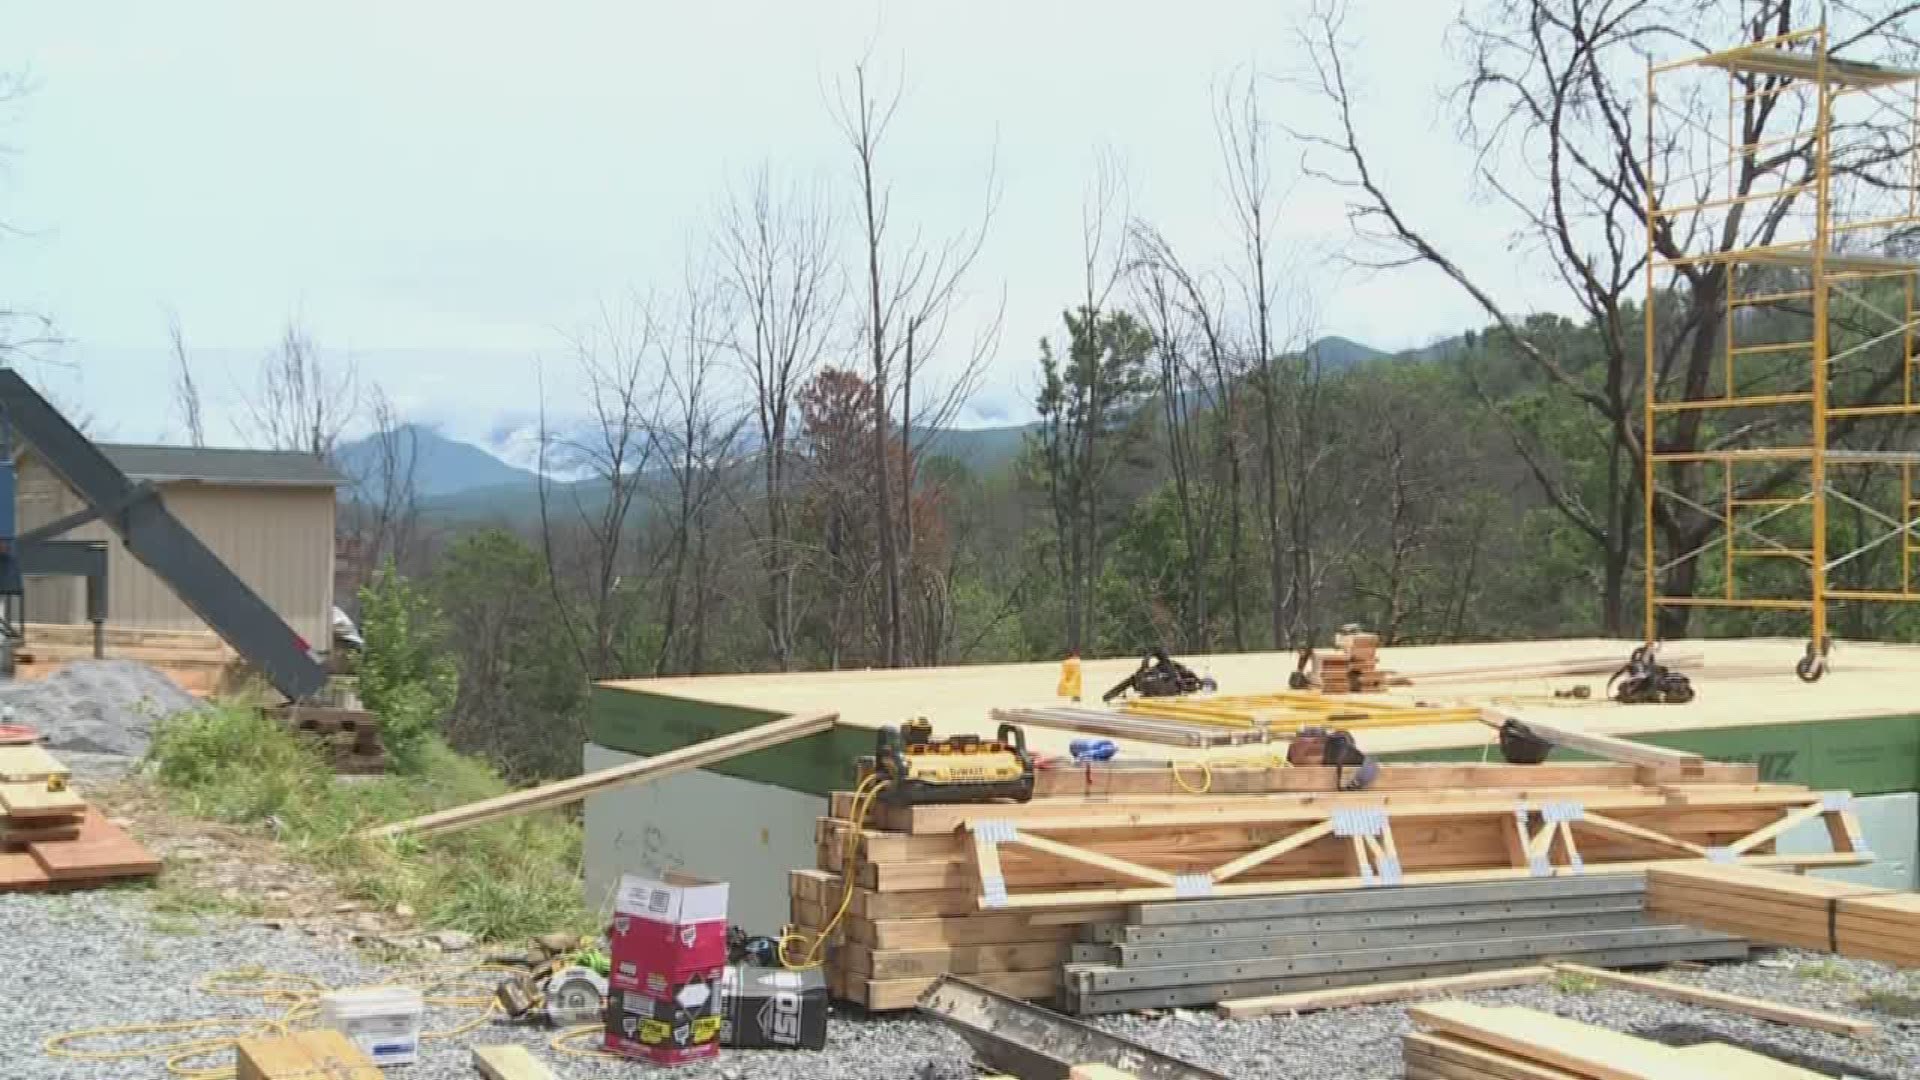 The Jucker family lost their home in the 2016 wildfires. It's taken them awhile to rebuild because they want to make sure its rebuilt in the safest way.